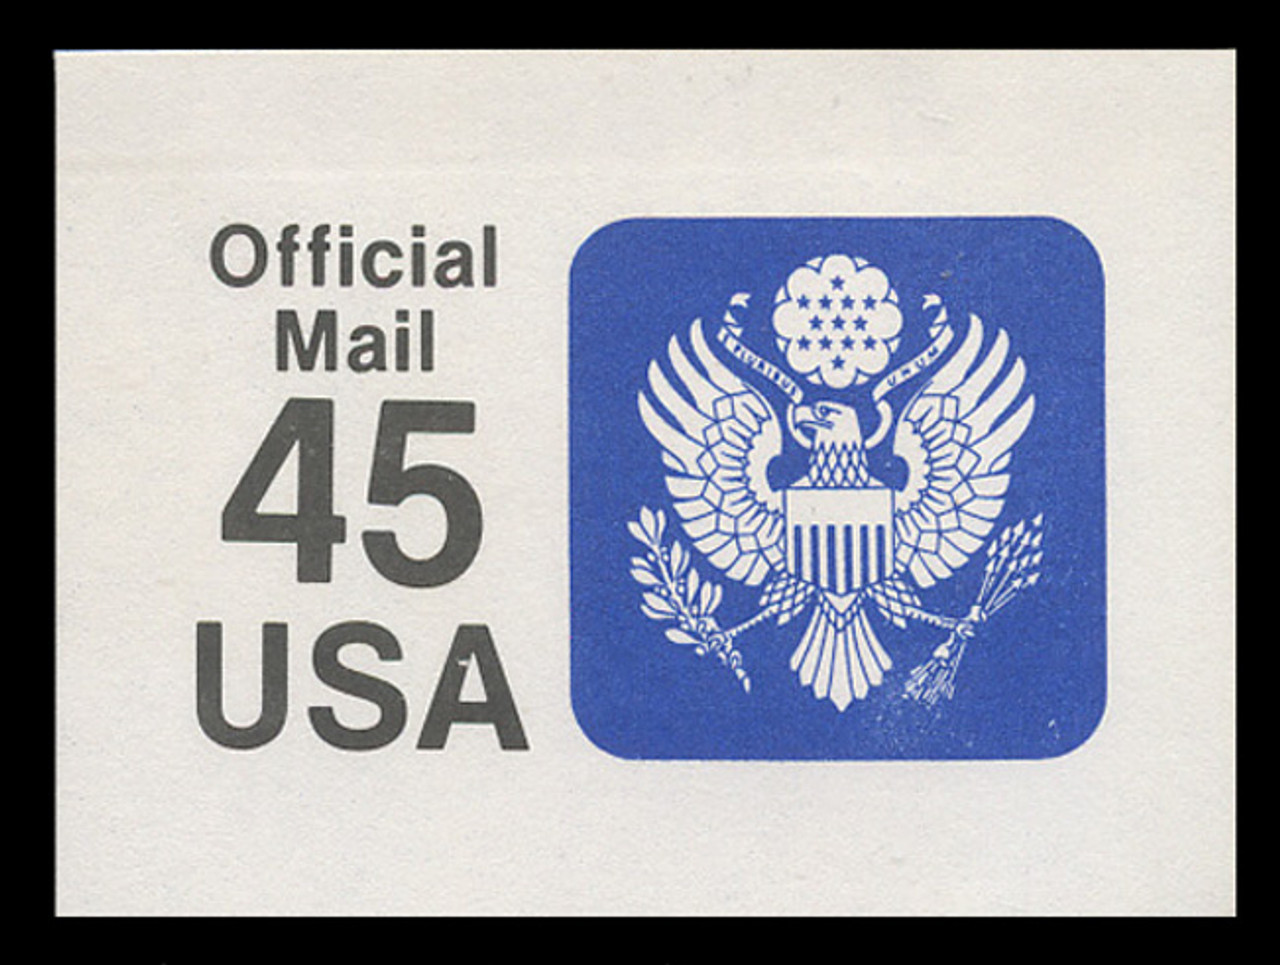 USA Scott # UO  81 1990 45c Official Mail, small lettering clear - Mint Cut Square